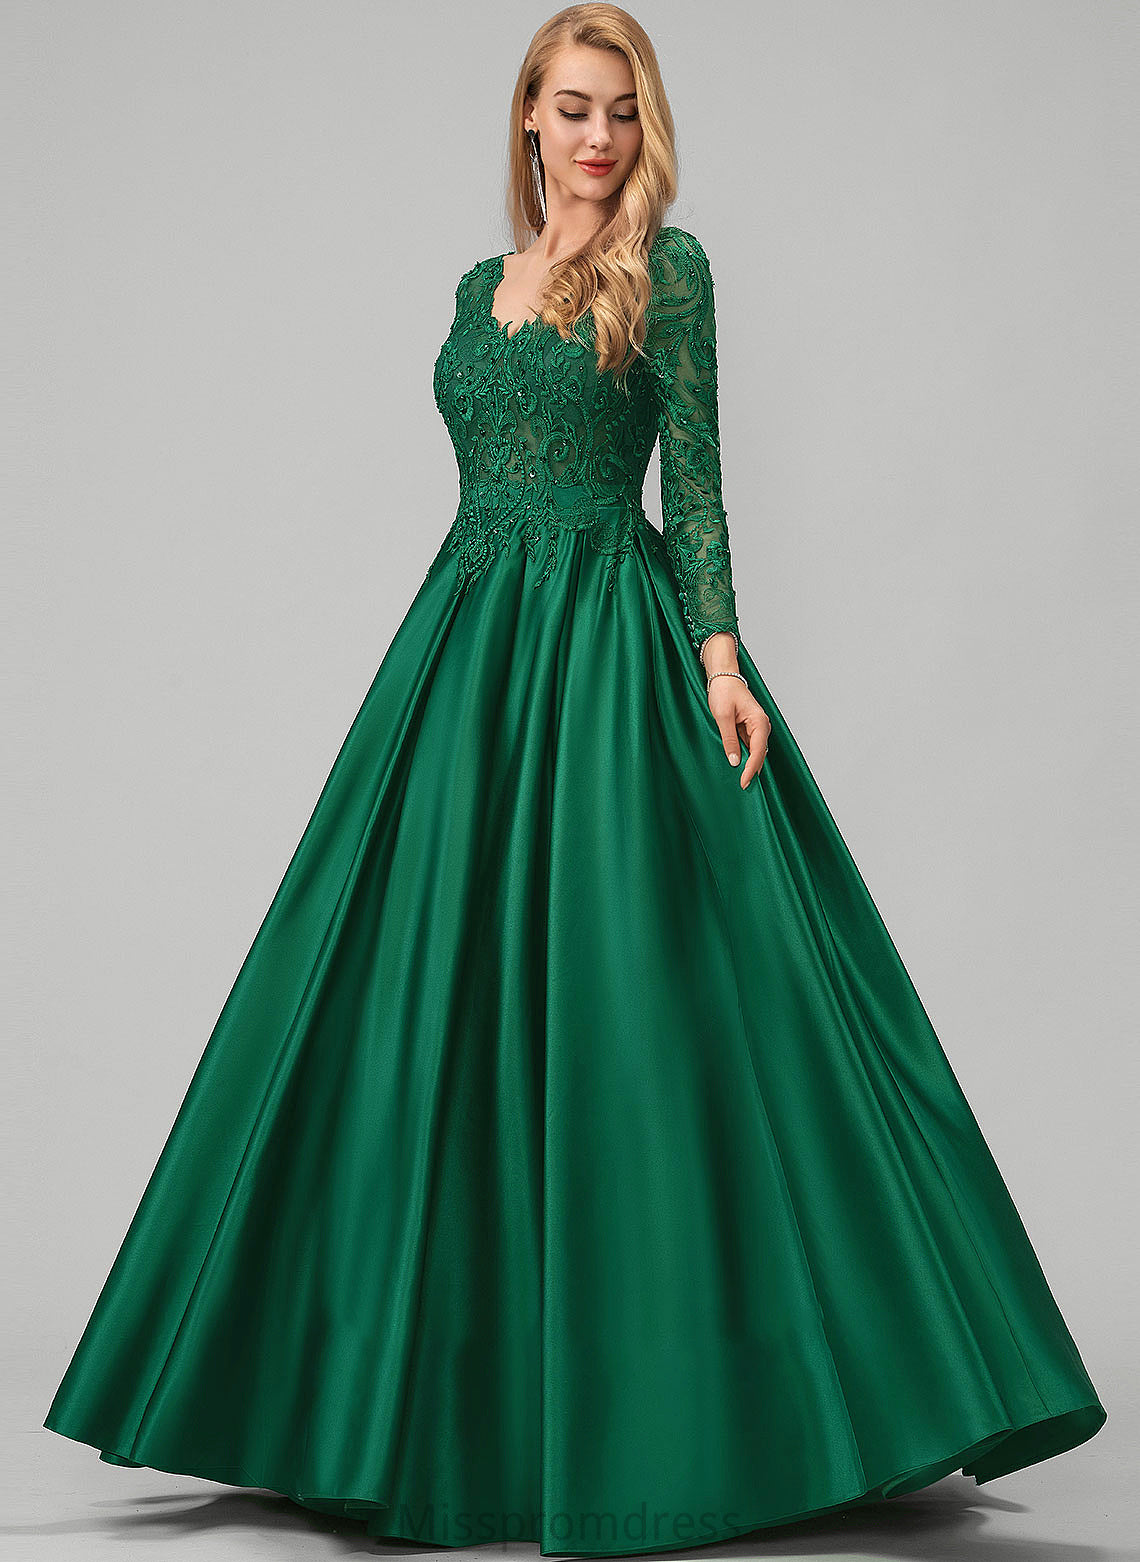 Lace Prom Dresses Beading Satin Floor-Length Pockets V-neck Martina Ball-Gown/Princess Sequins With